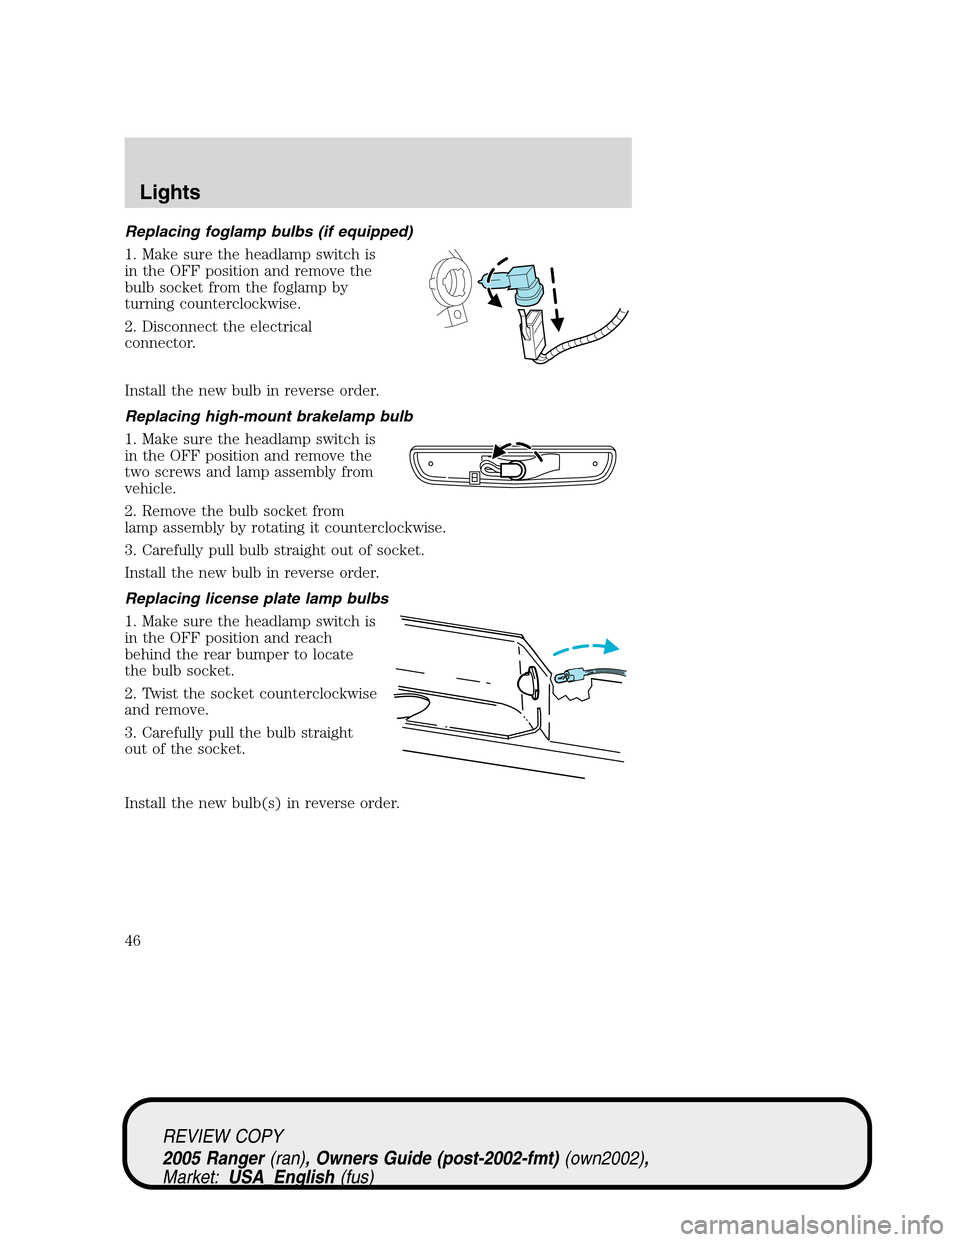 FORD RANGER 2005 2.G Owners Manual Replacing foglamp bulbs (if equipped)
1. Make sure the headlamp switch is
in the OFF position and remove the
bulb socket from the foglamp by
turning counterclockwise.
2. Disconnect the electrical
conn